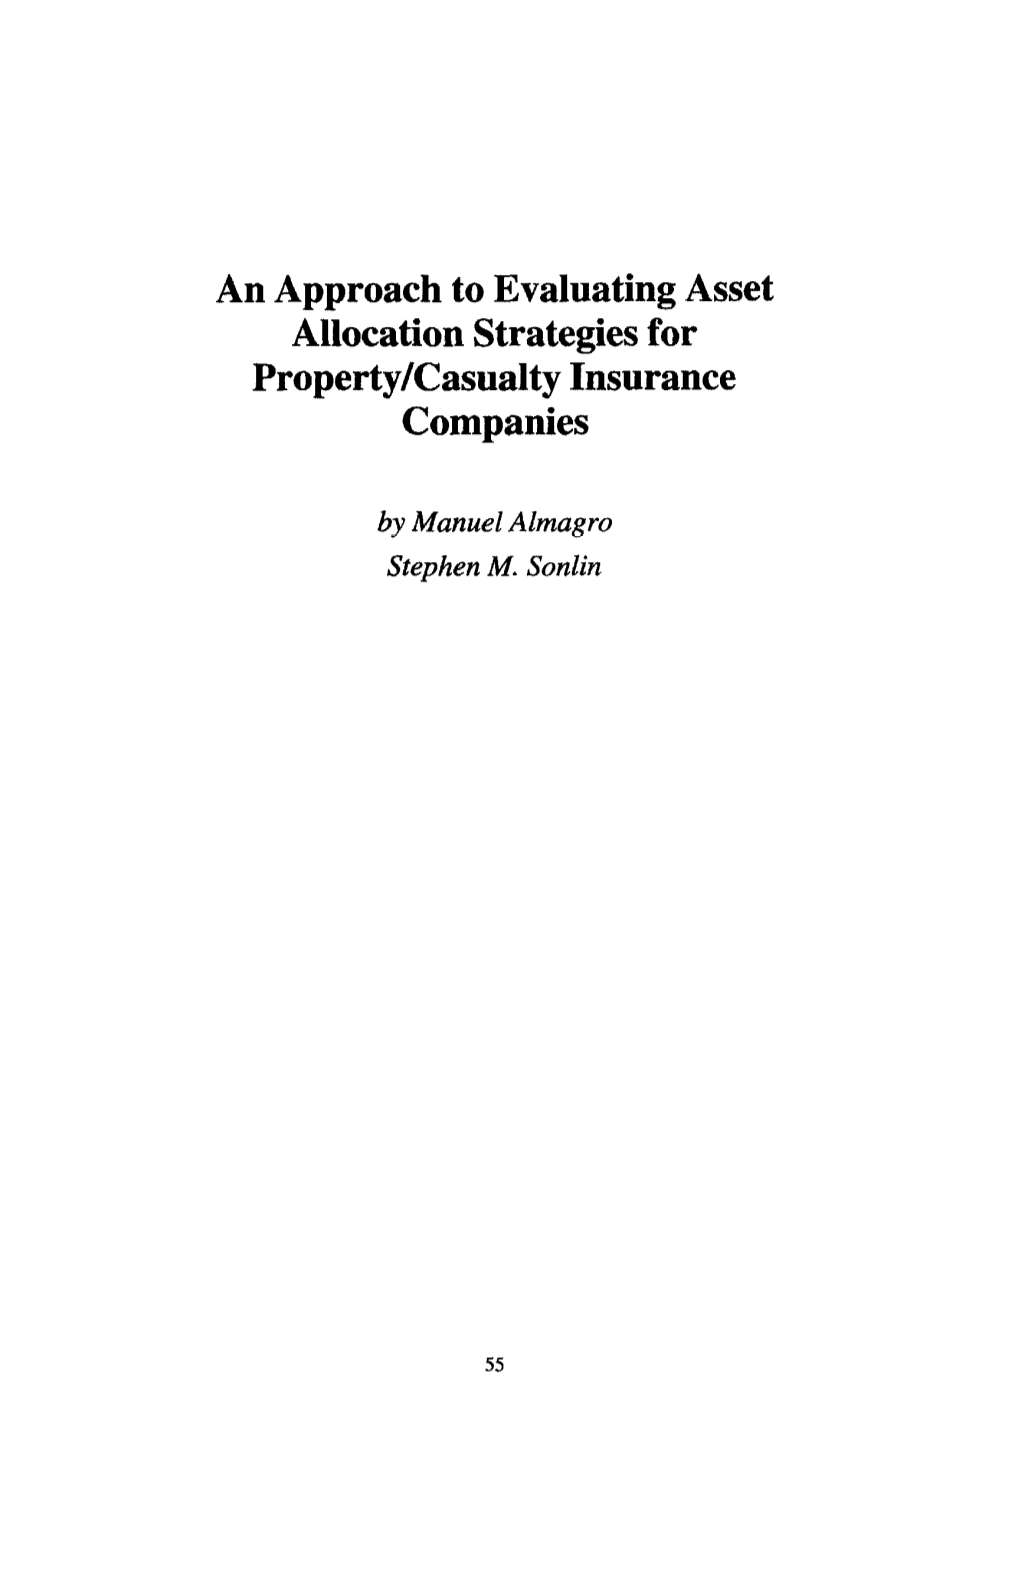 An Approach to Evaluating Asset Allocation Strategies for Property/Casualty Insurance Companies